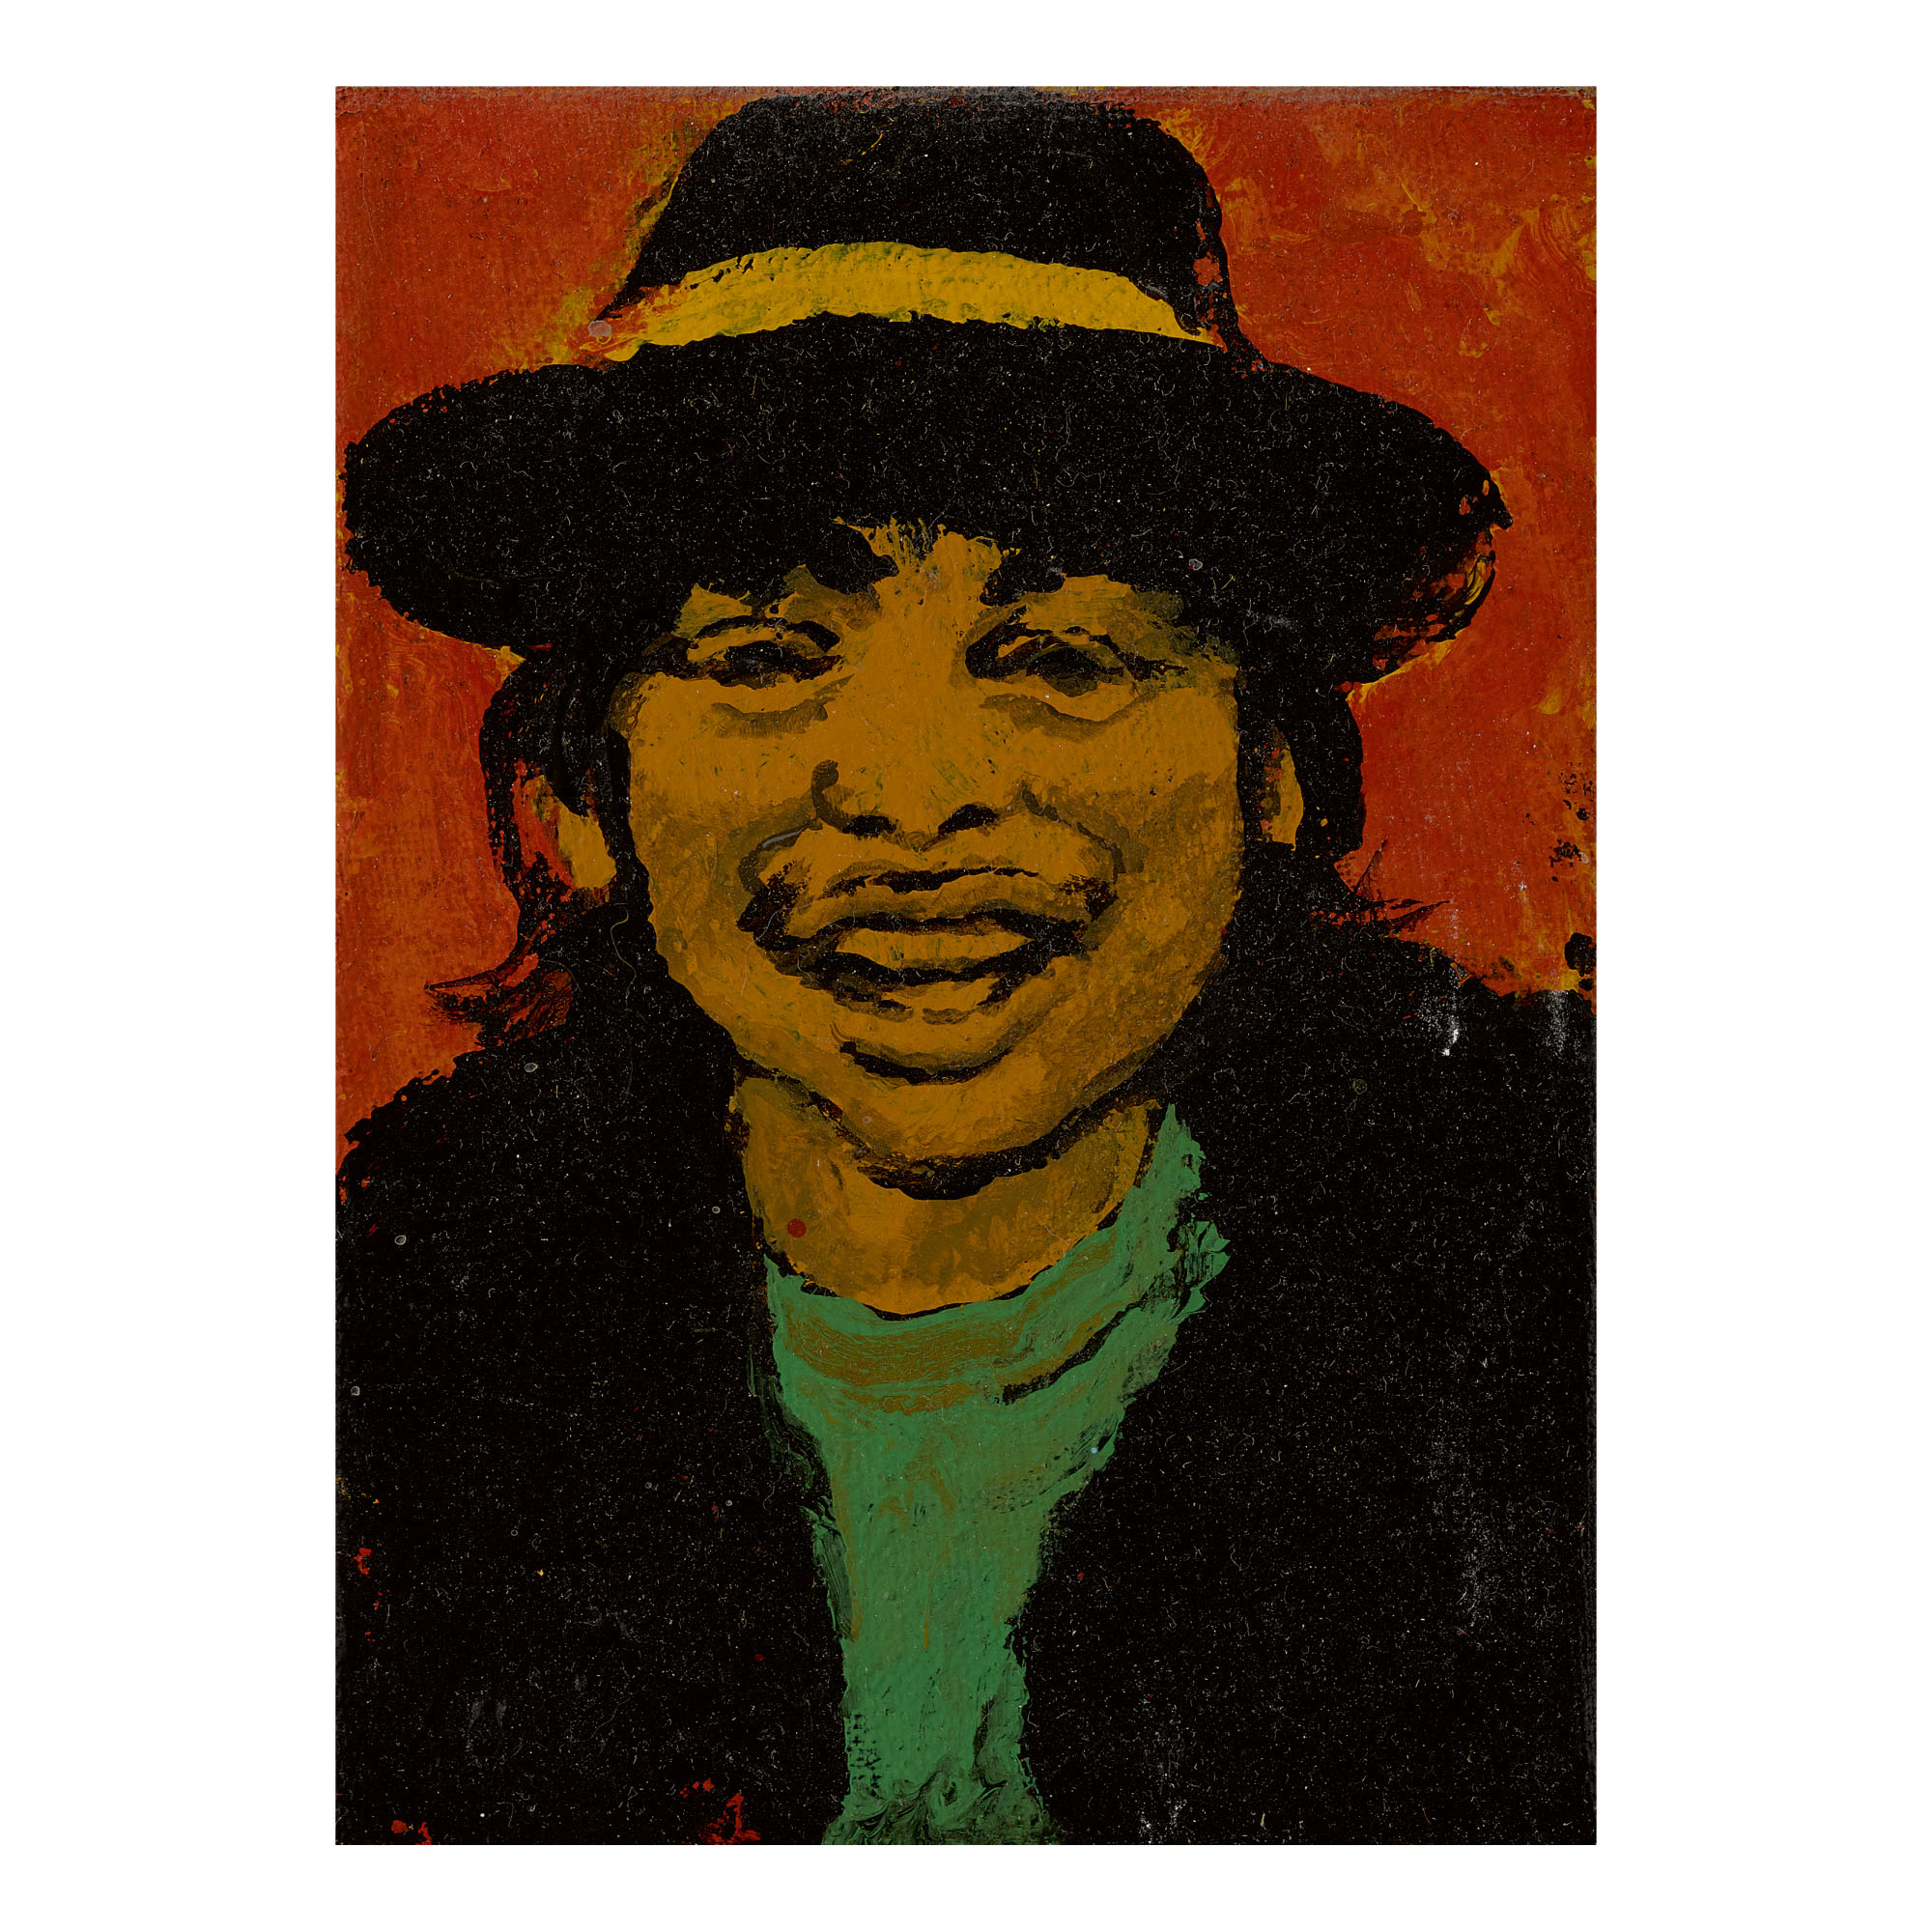 Portrait of a Hispanic Youth (1985) by Martin Wong. Image courtesy of Sotheby's